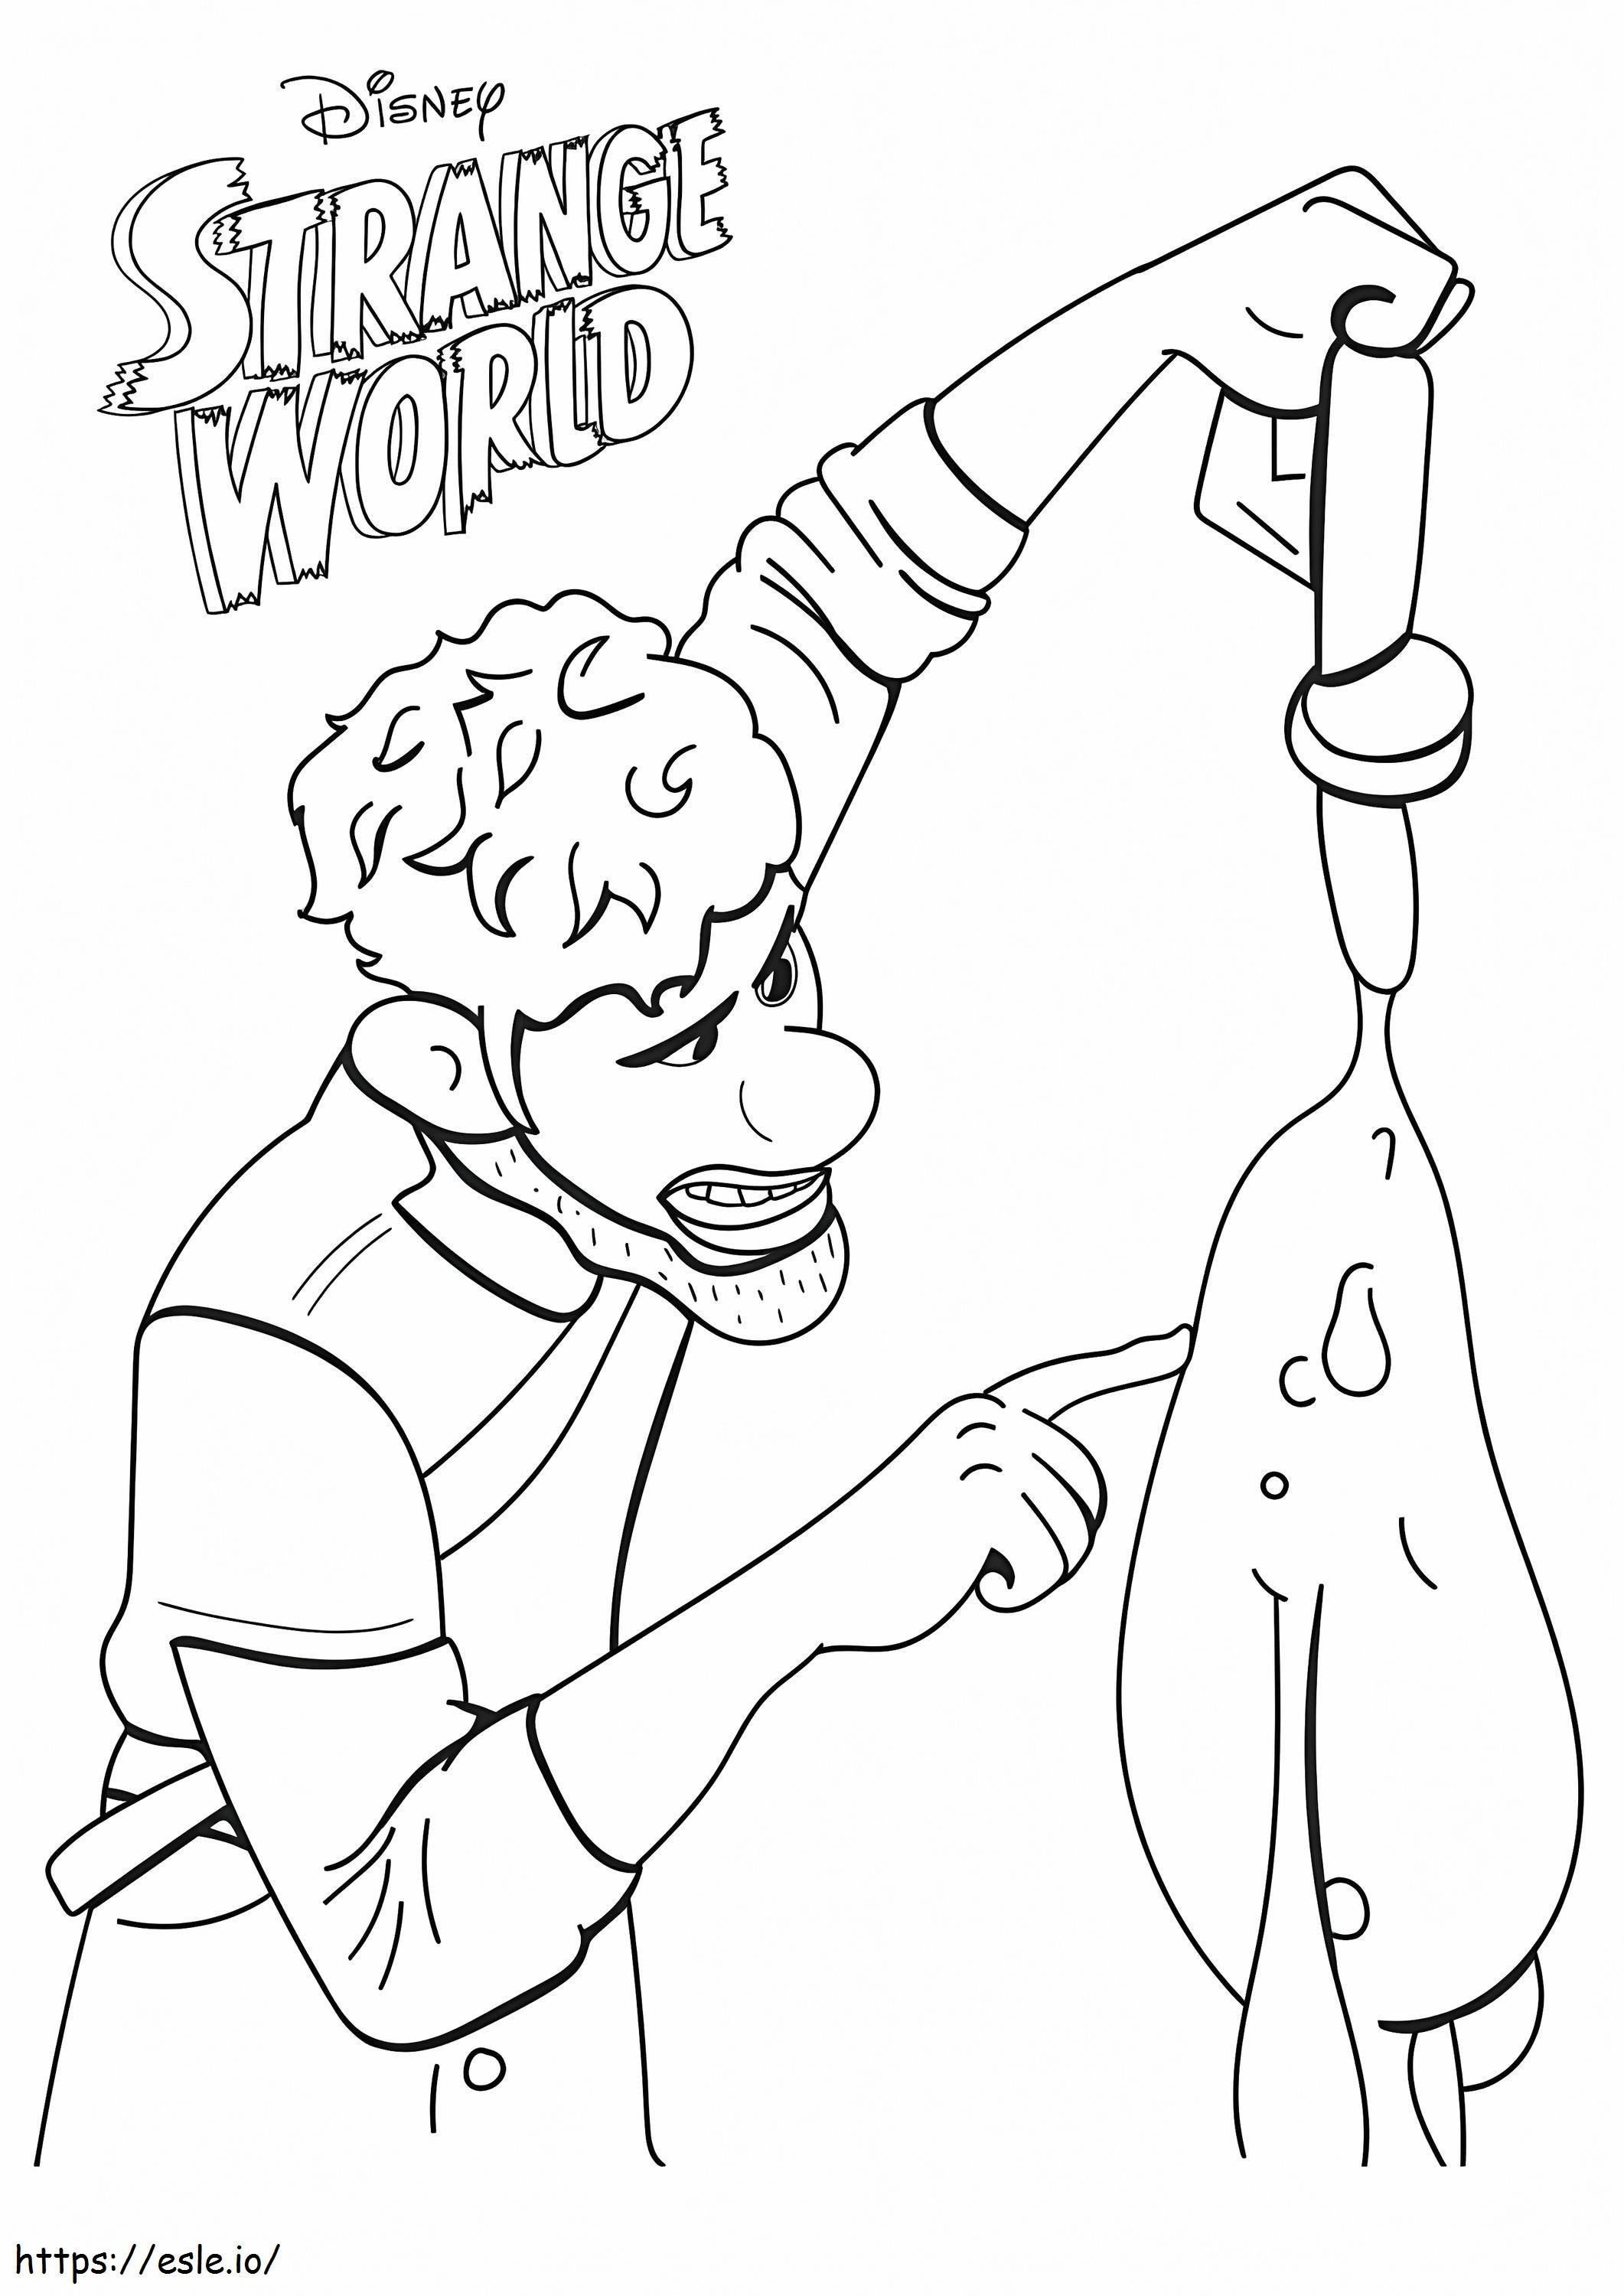 Clade From Strange World coloring page